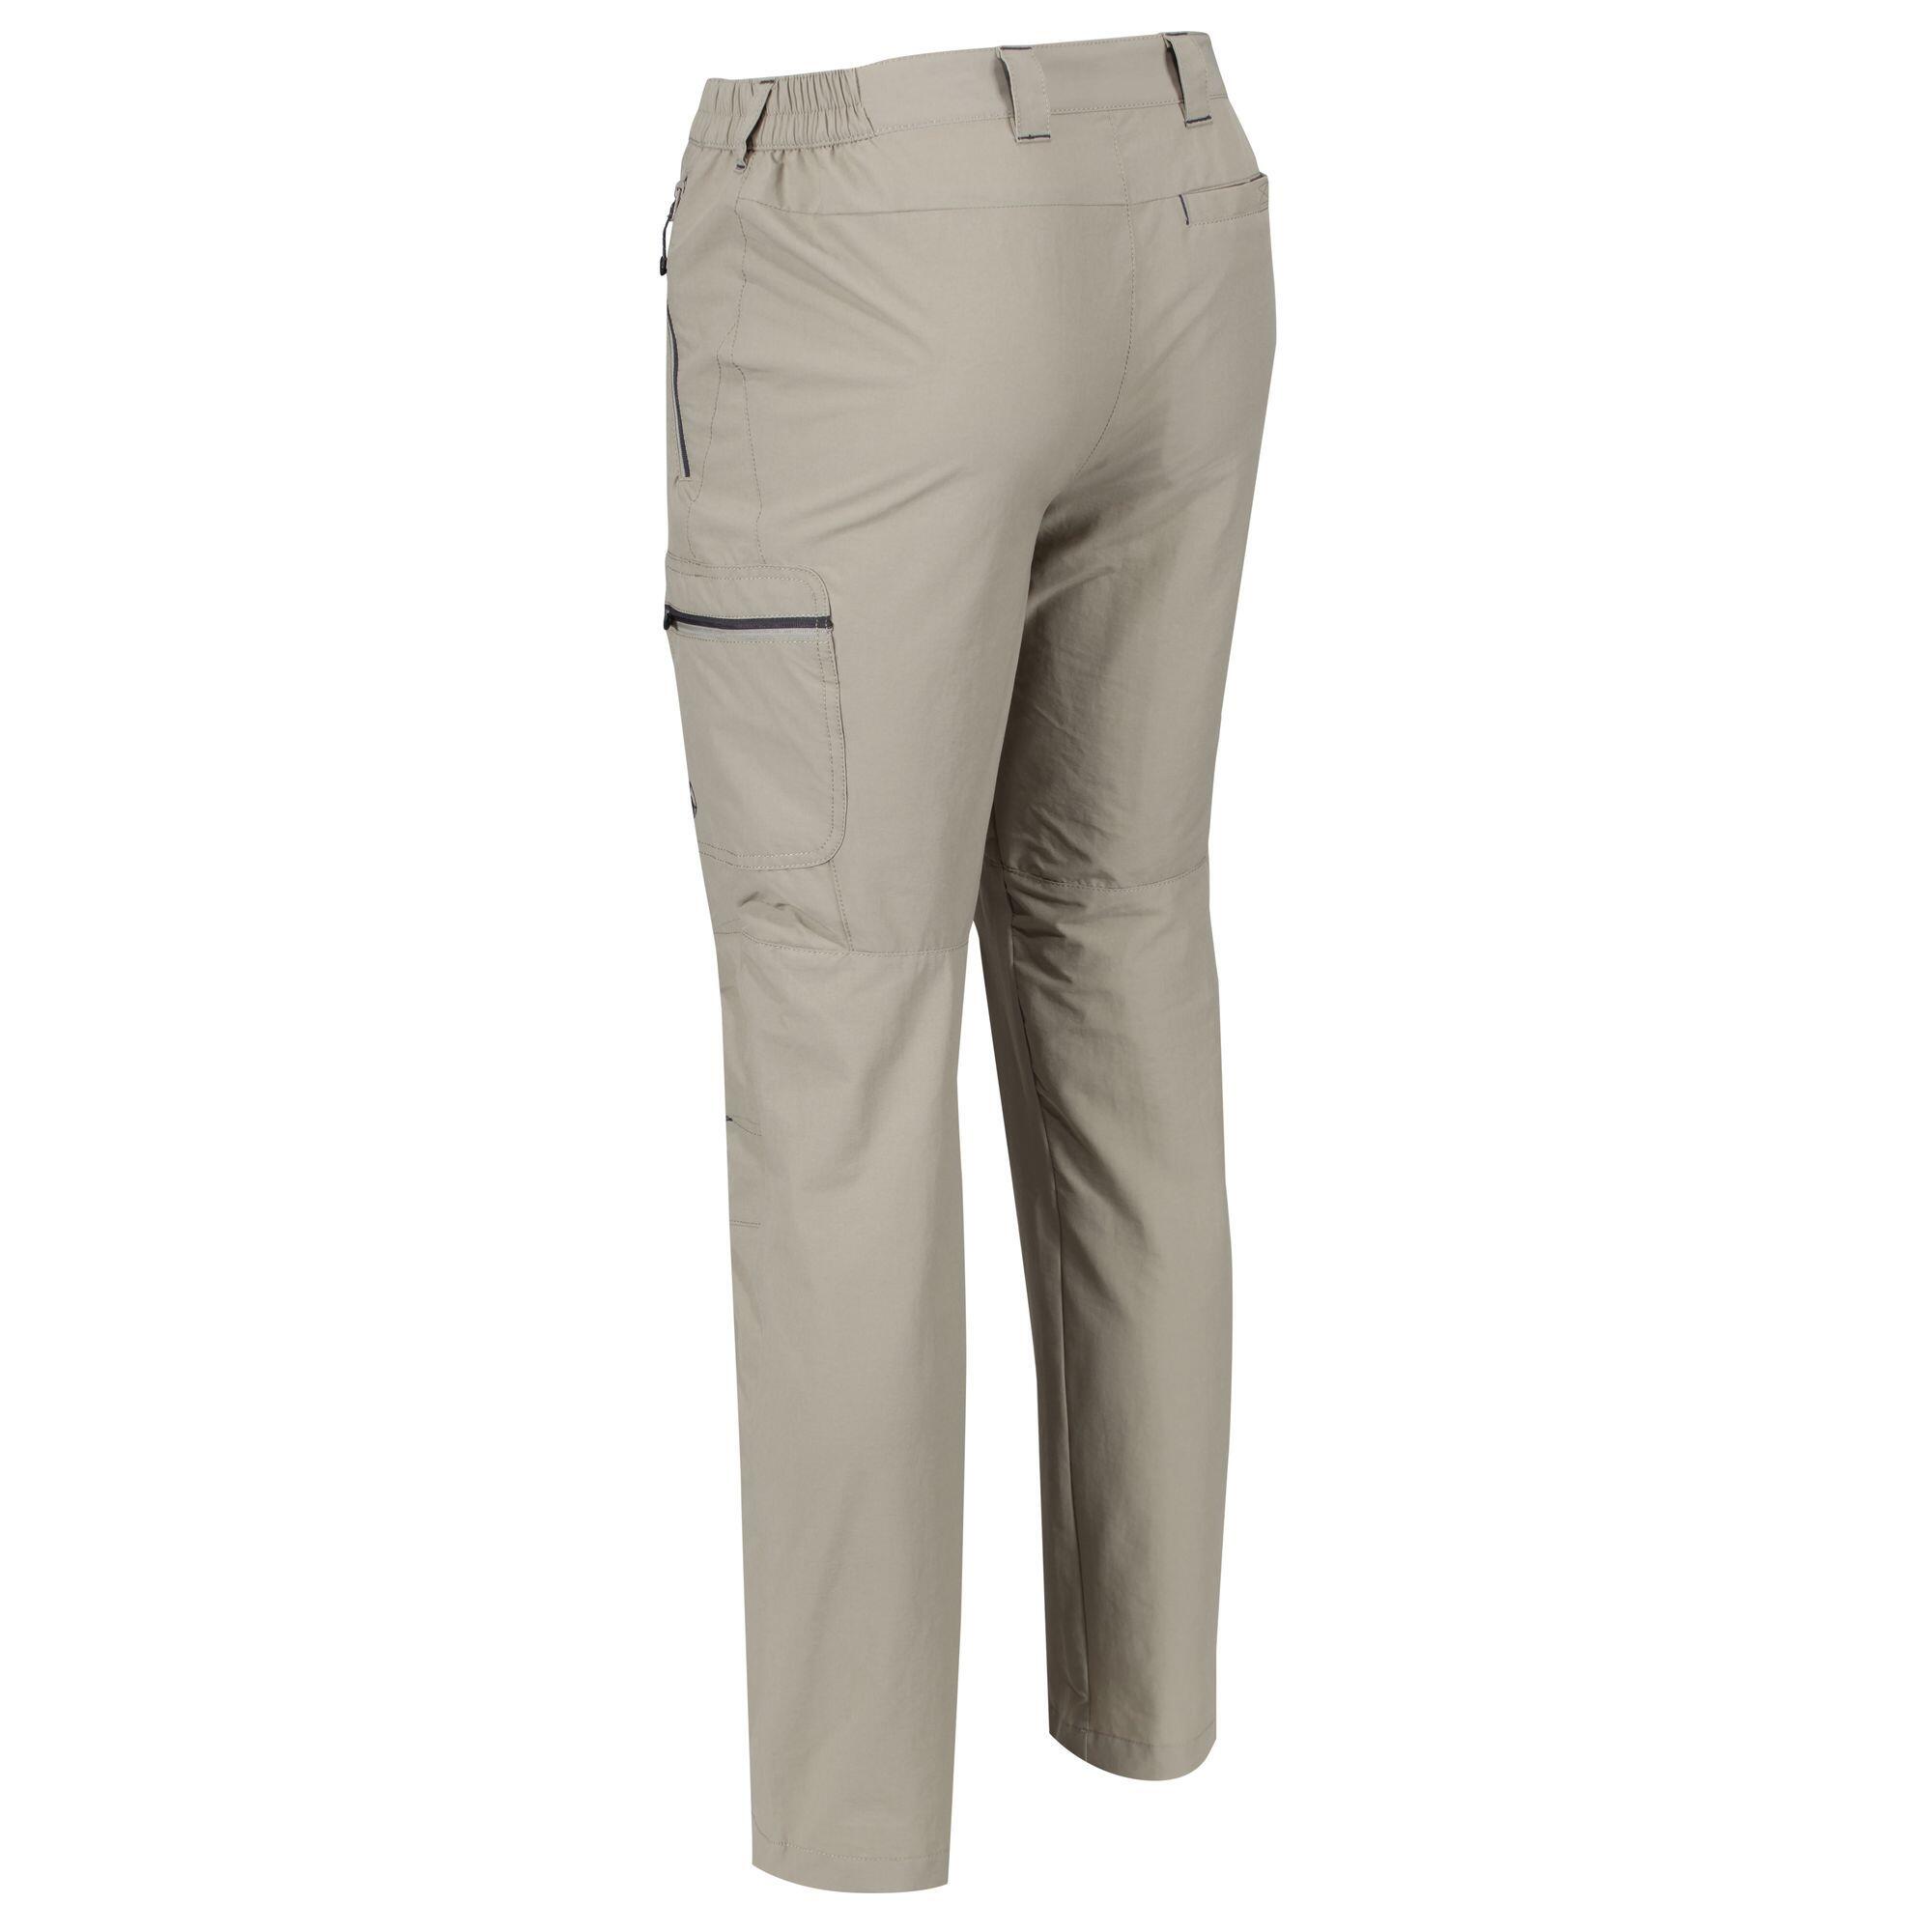 Mens Highton Zip Off Walking Trousers (Parchment White) 2/5